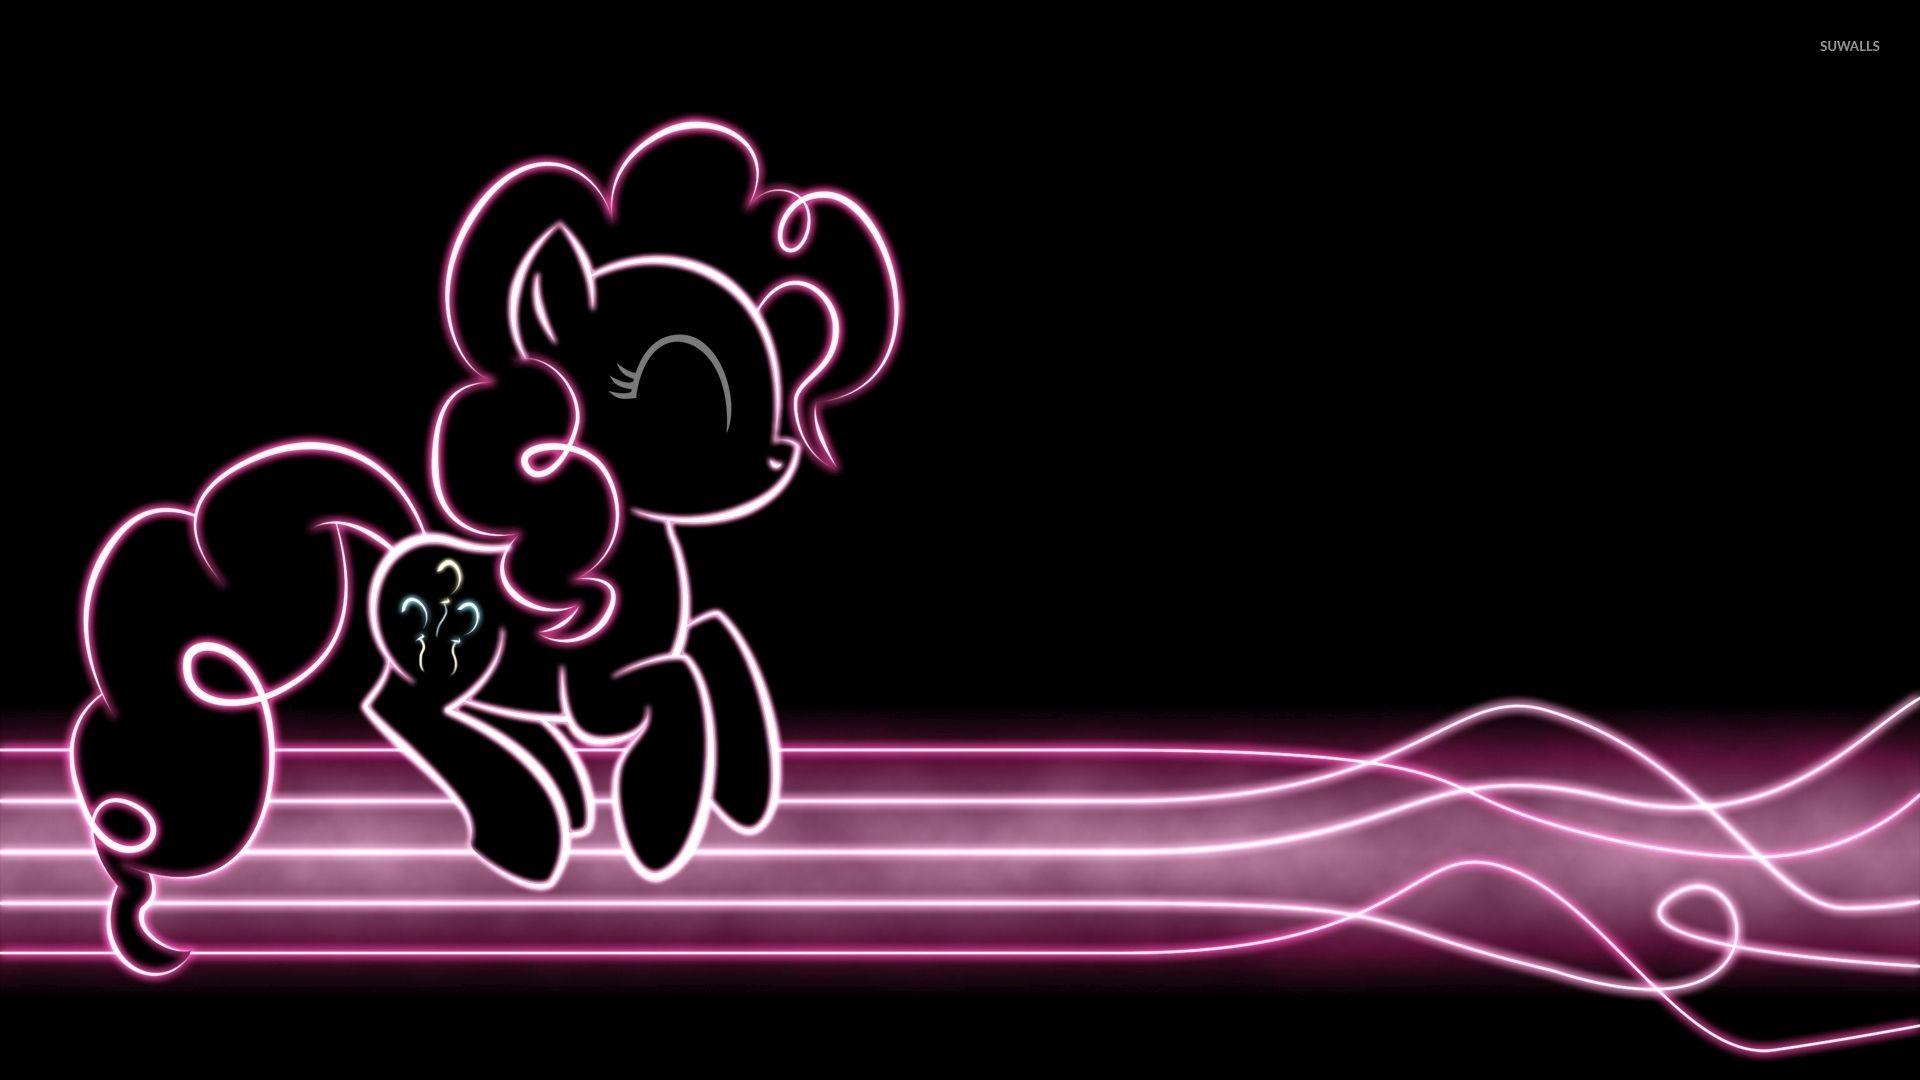 Pinkie Pie floating above a neon path Little Pony wallpaper